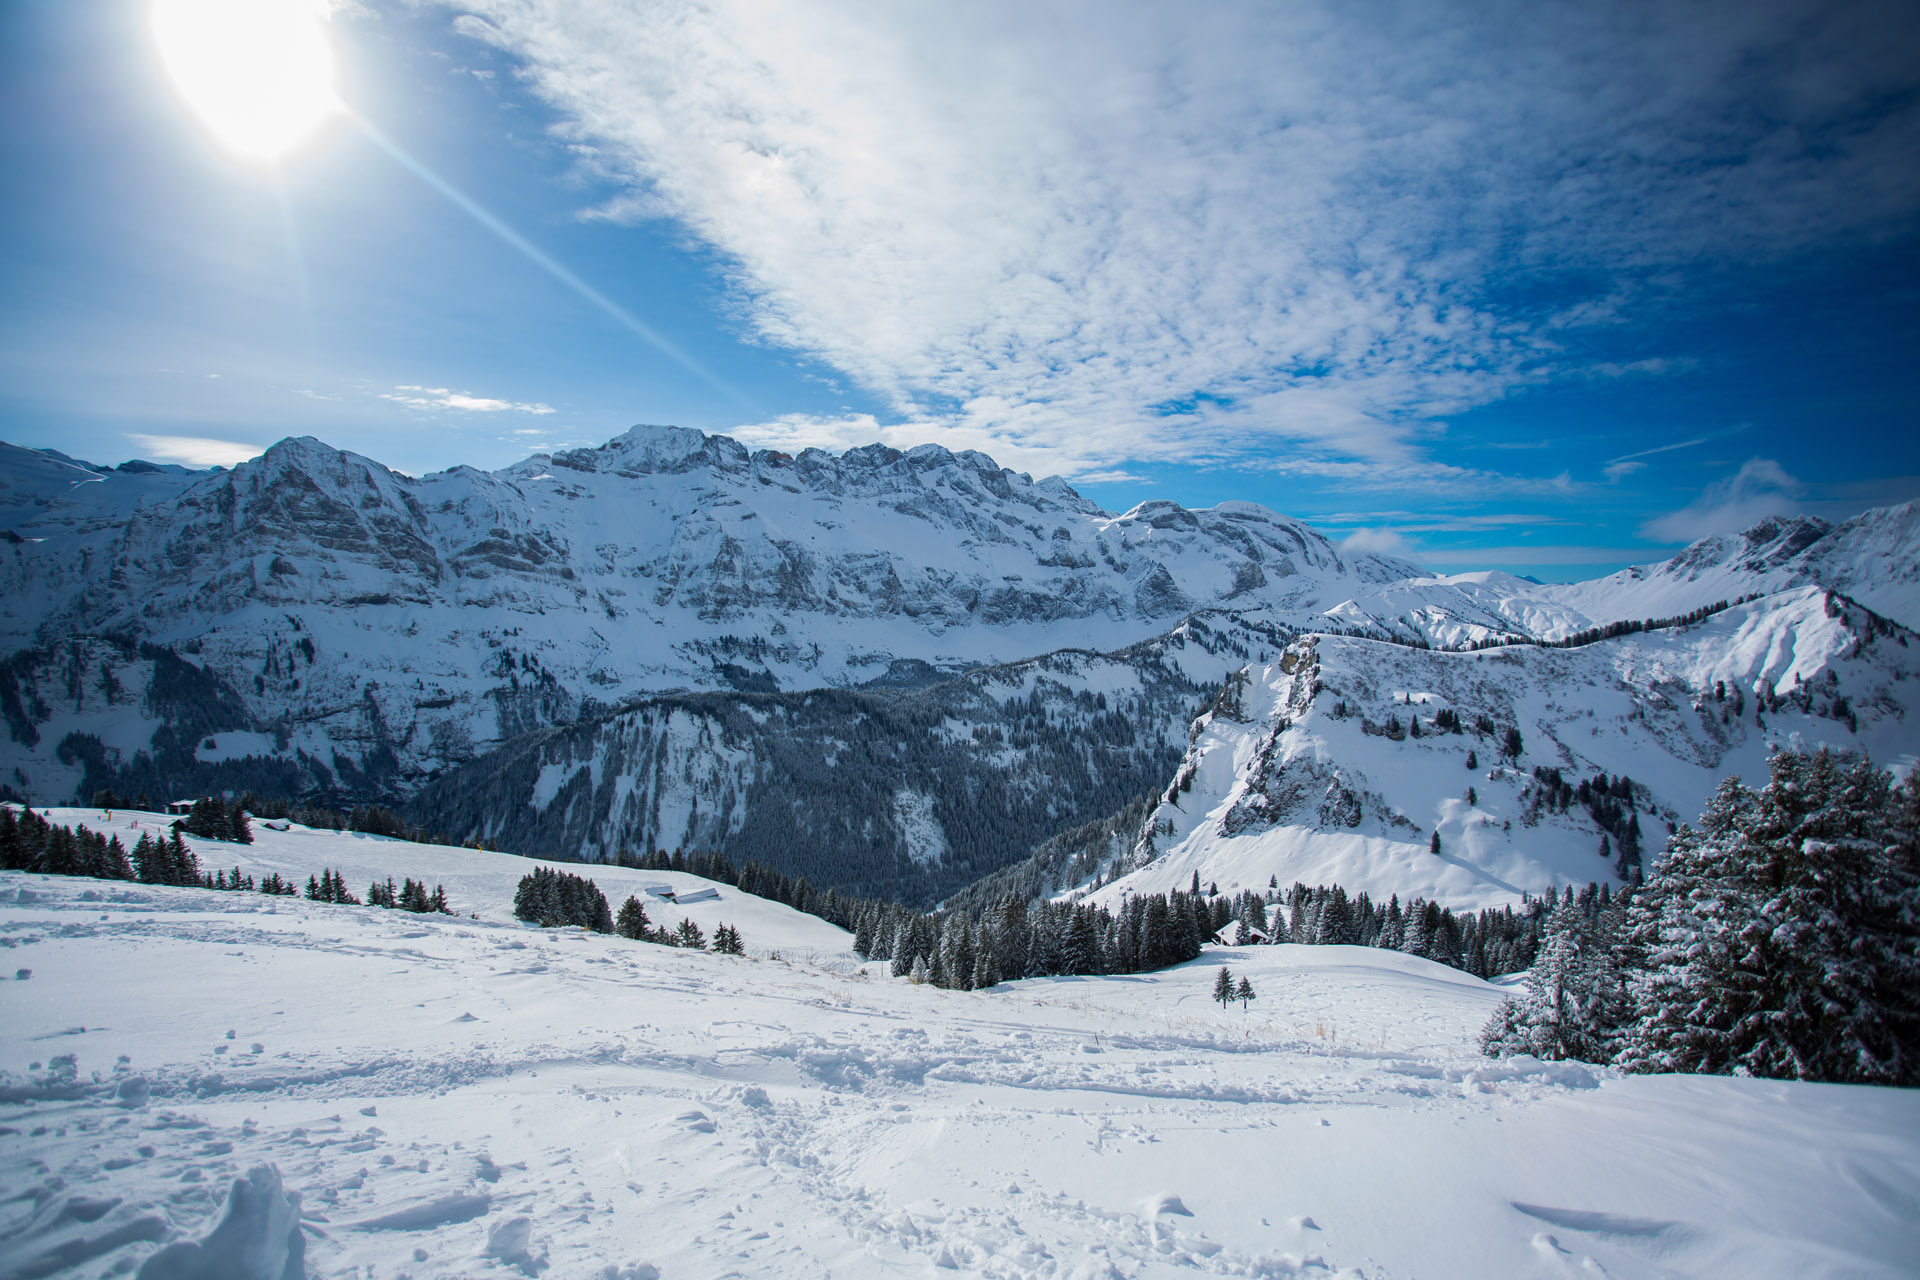 Snowy Mountain Valley on a Sunny Day in Morzine, France.